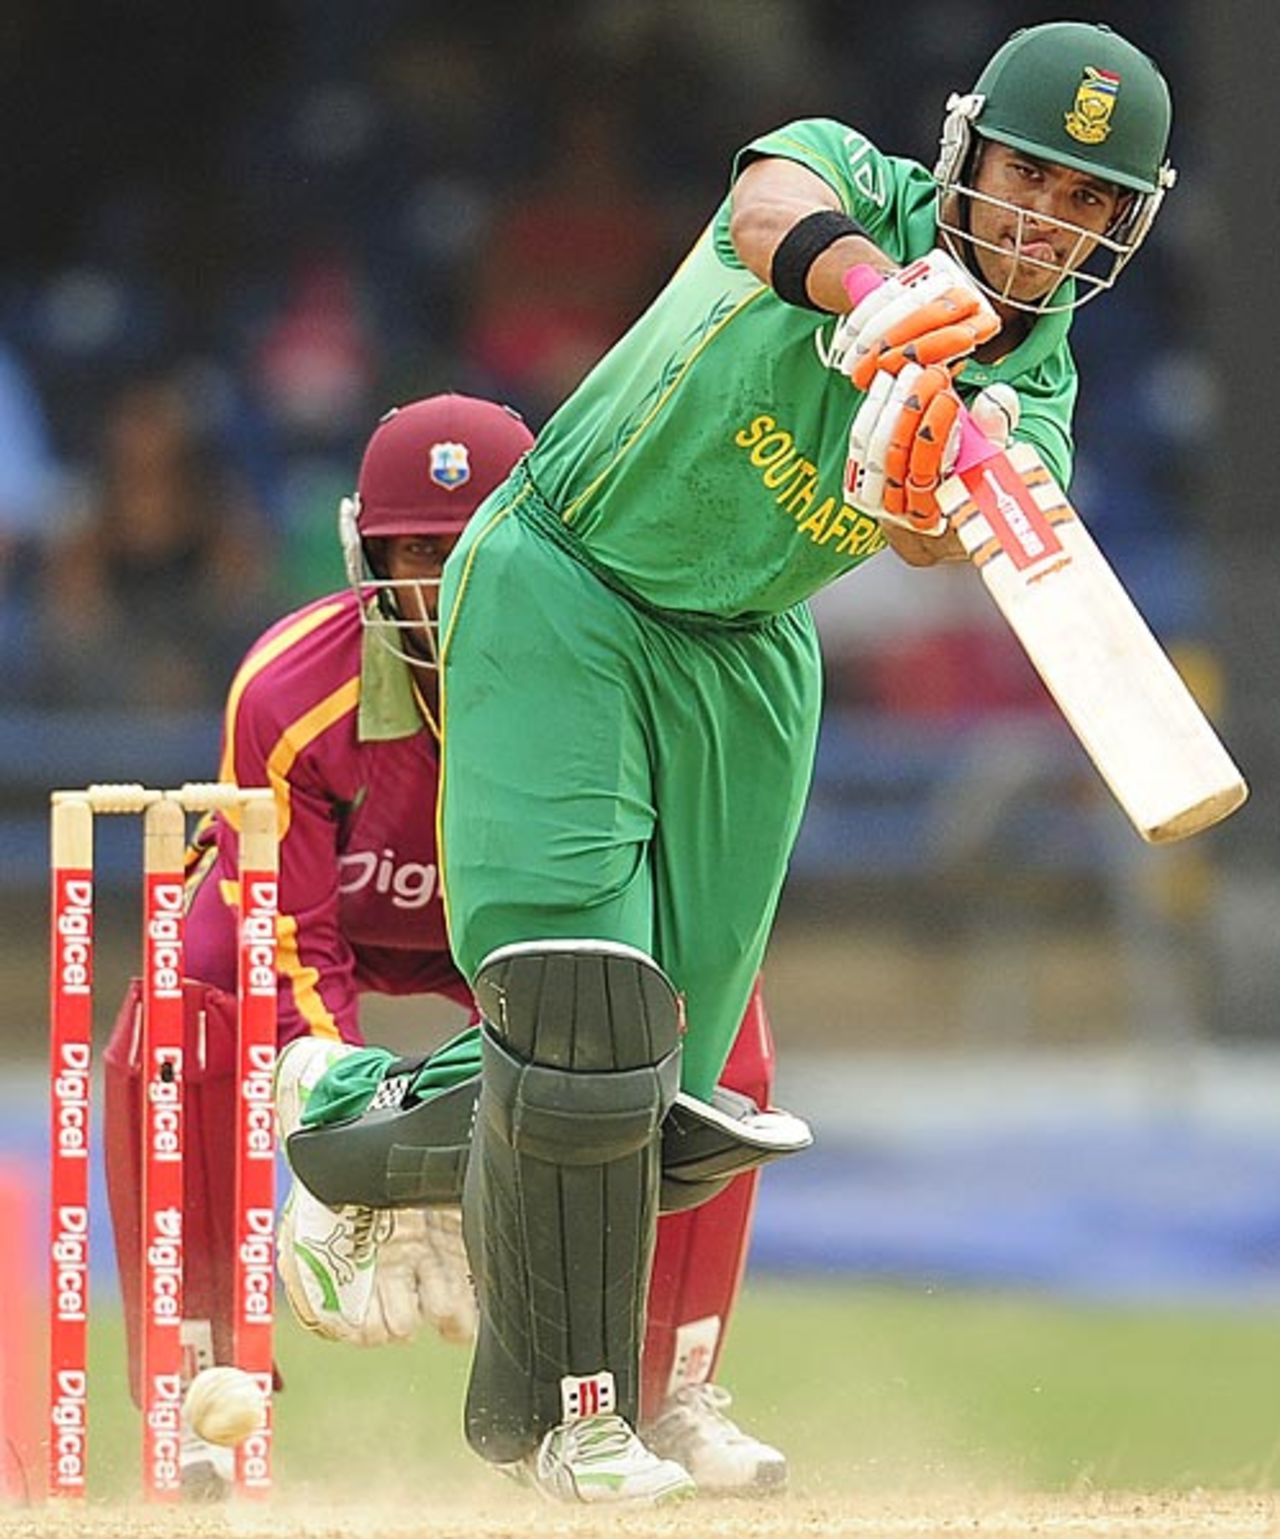 JP Duminy scored a steady half-century, West Indies v South Africa, 5th ODI, Port of Spain, Trinidad, June 3, 2010